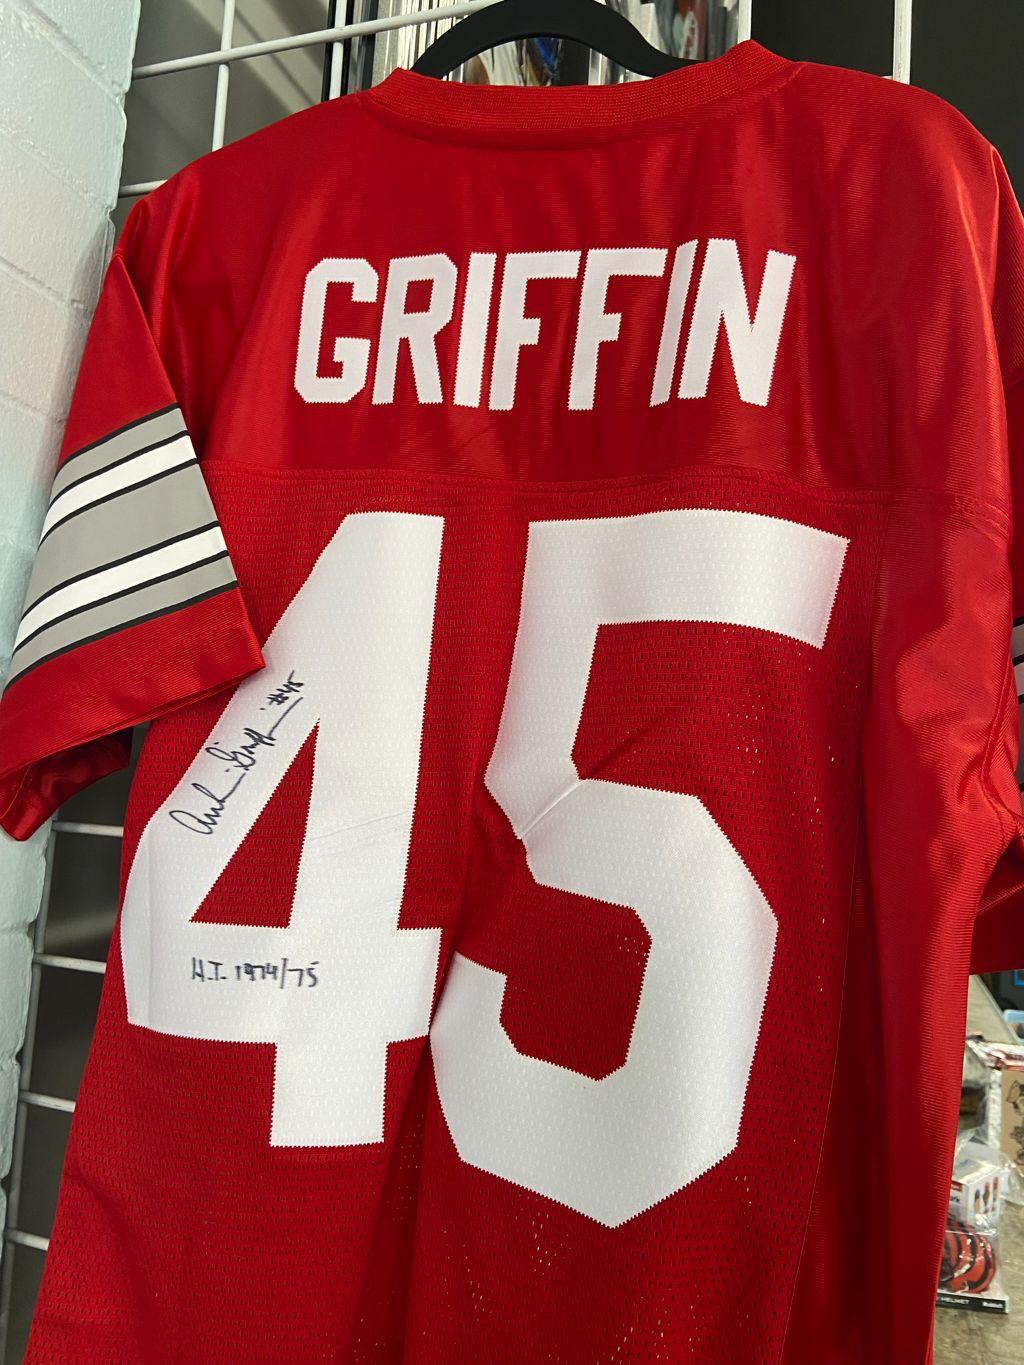 Archie Griffen Signed Jersey